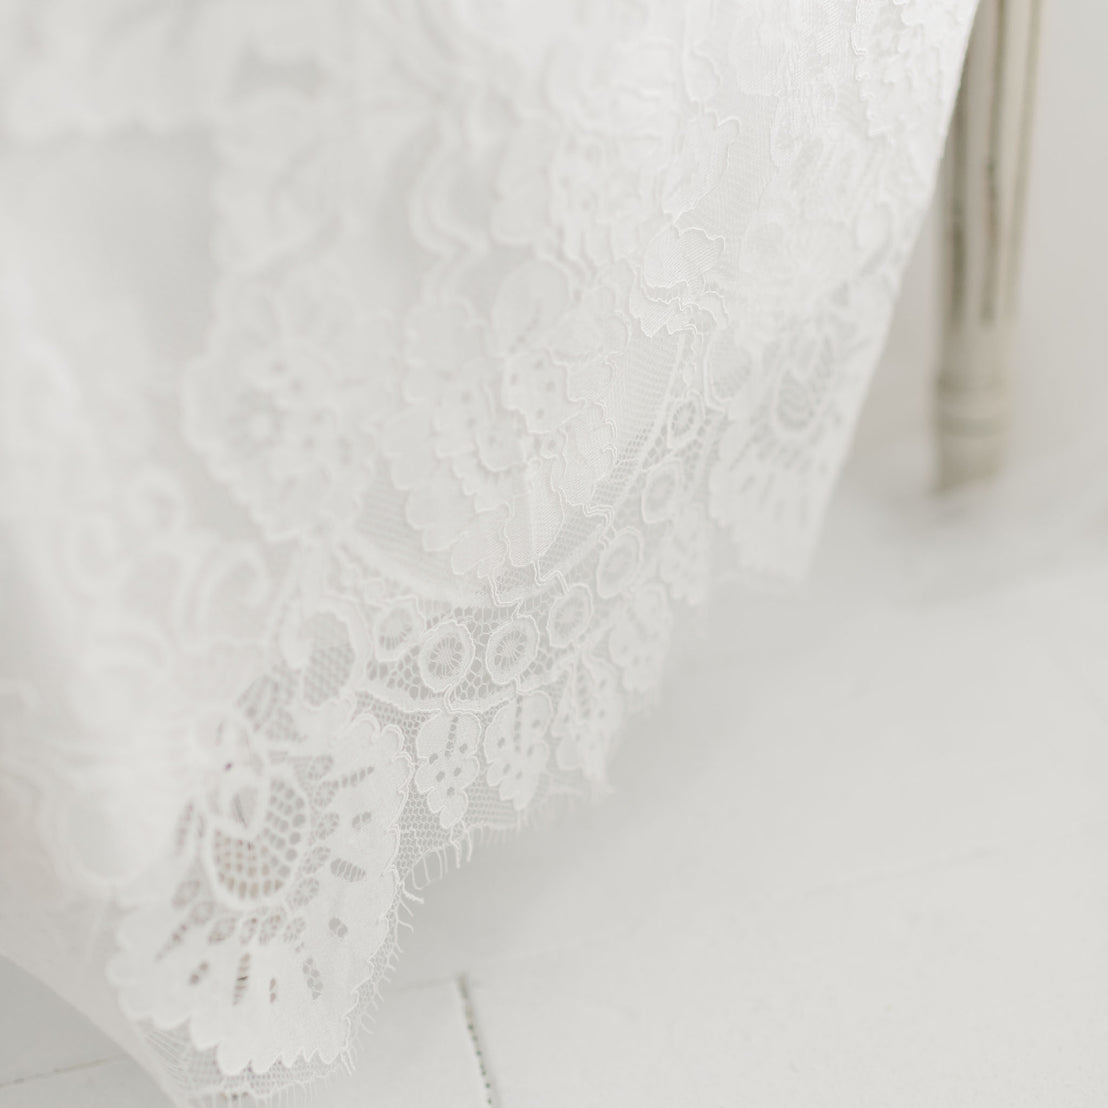 Close-up of delicate embroidered ivory floral lace featuring intricate floral patterns. The Victoria Puff Sleeve Christening Gown & Bonnet, with its elegant details clearly visible, drapes smoothly over a silk Dupioni lining, and a portion of a wooden chair leg appears in the background. The scene is well-lit and crisp.